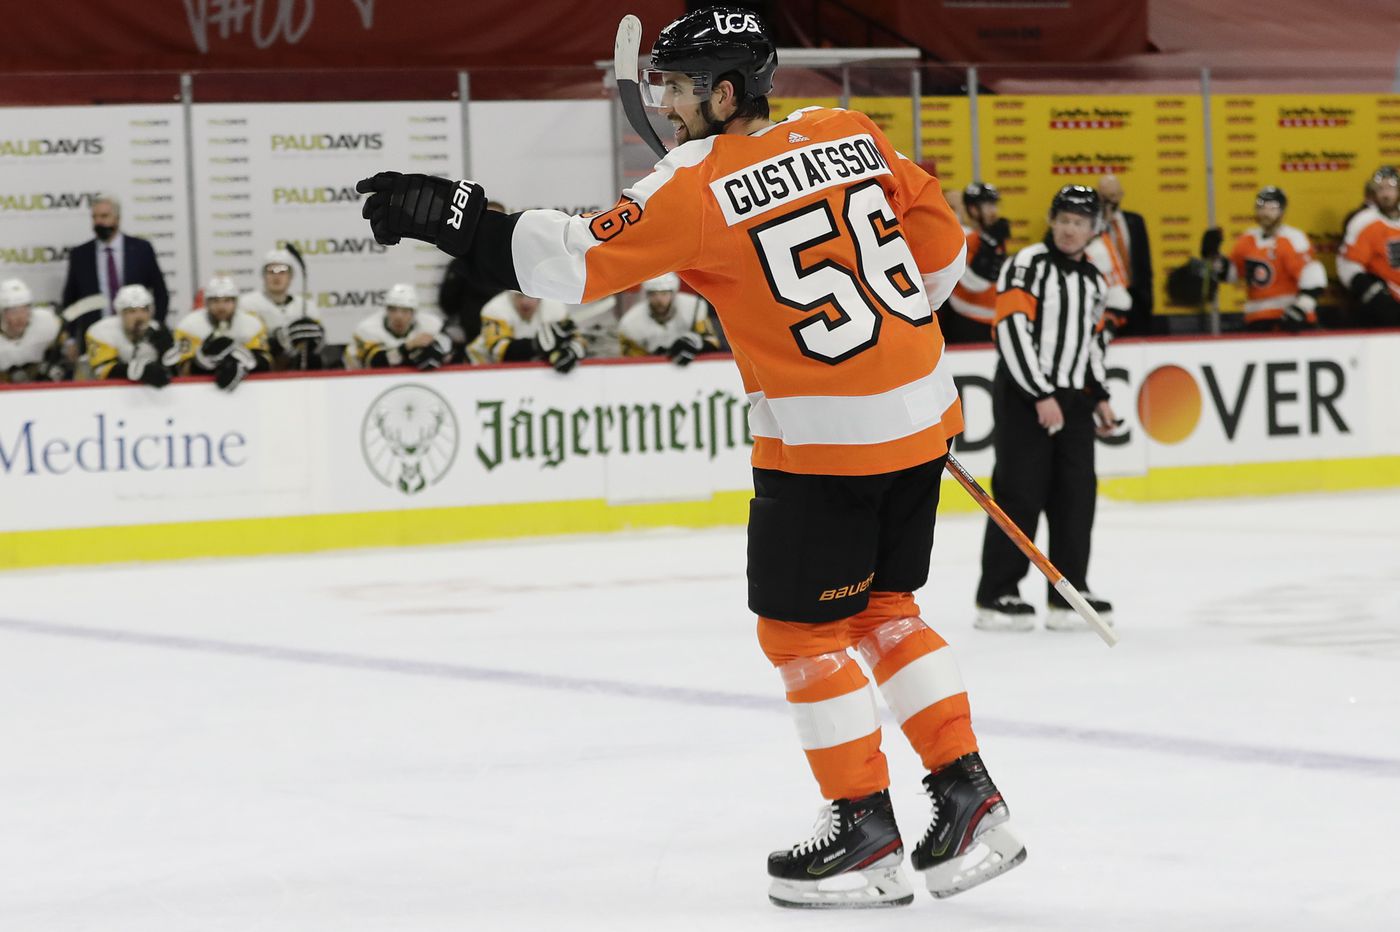 Erik Gustafsson ignites power play in his first game with Flyers